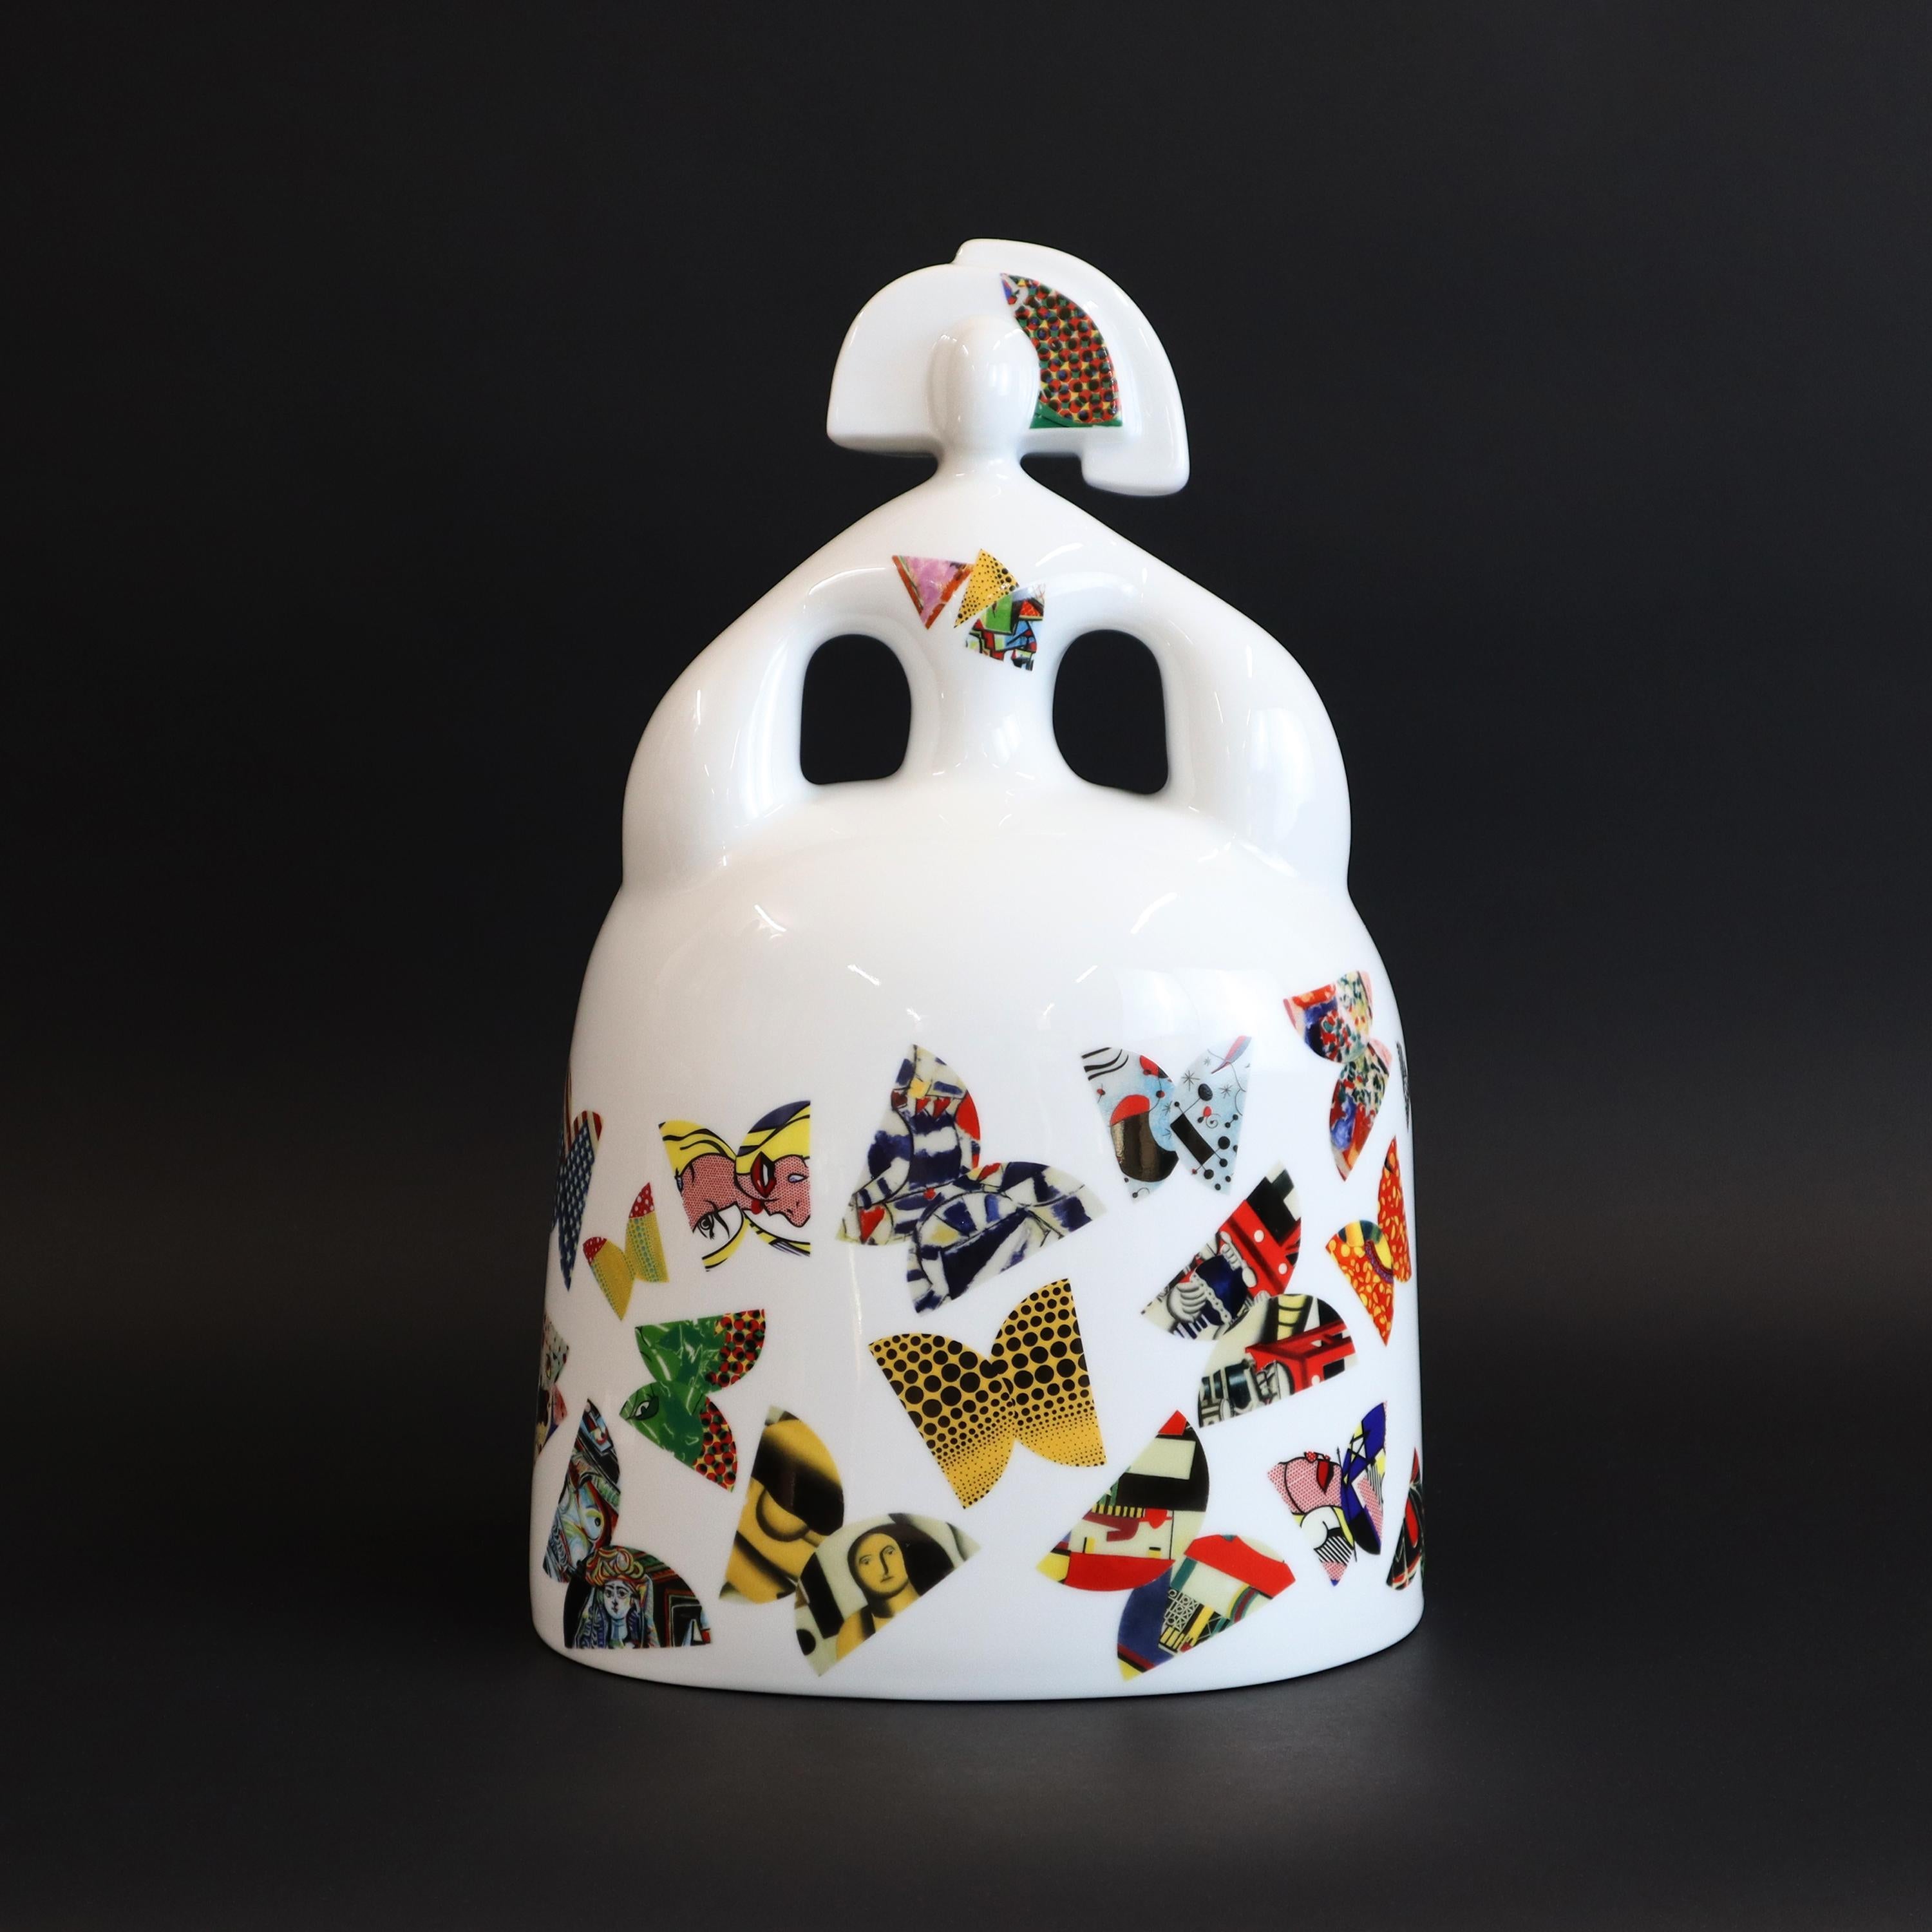 Manolo Valdes
Reina Mariana I (Las Meninas), 2022
Limoges Porcelain
35 × 23.5 × 17.8 cm
(13.8 × 9.3 × 7 in)
Edition of 199
In mint condition

Images of edition number are example references only.

The seller can only provide the specific edition